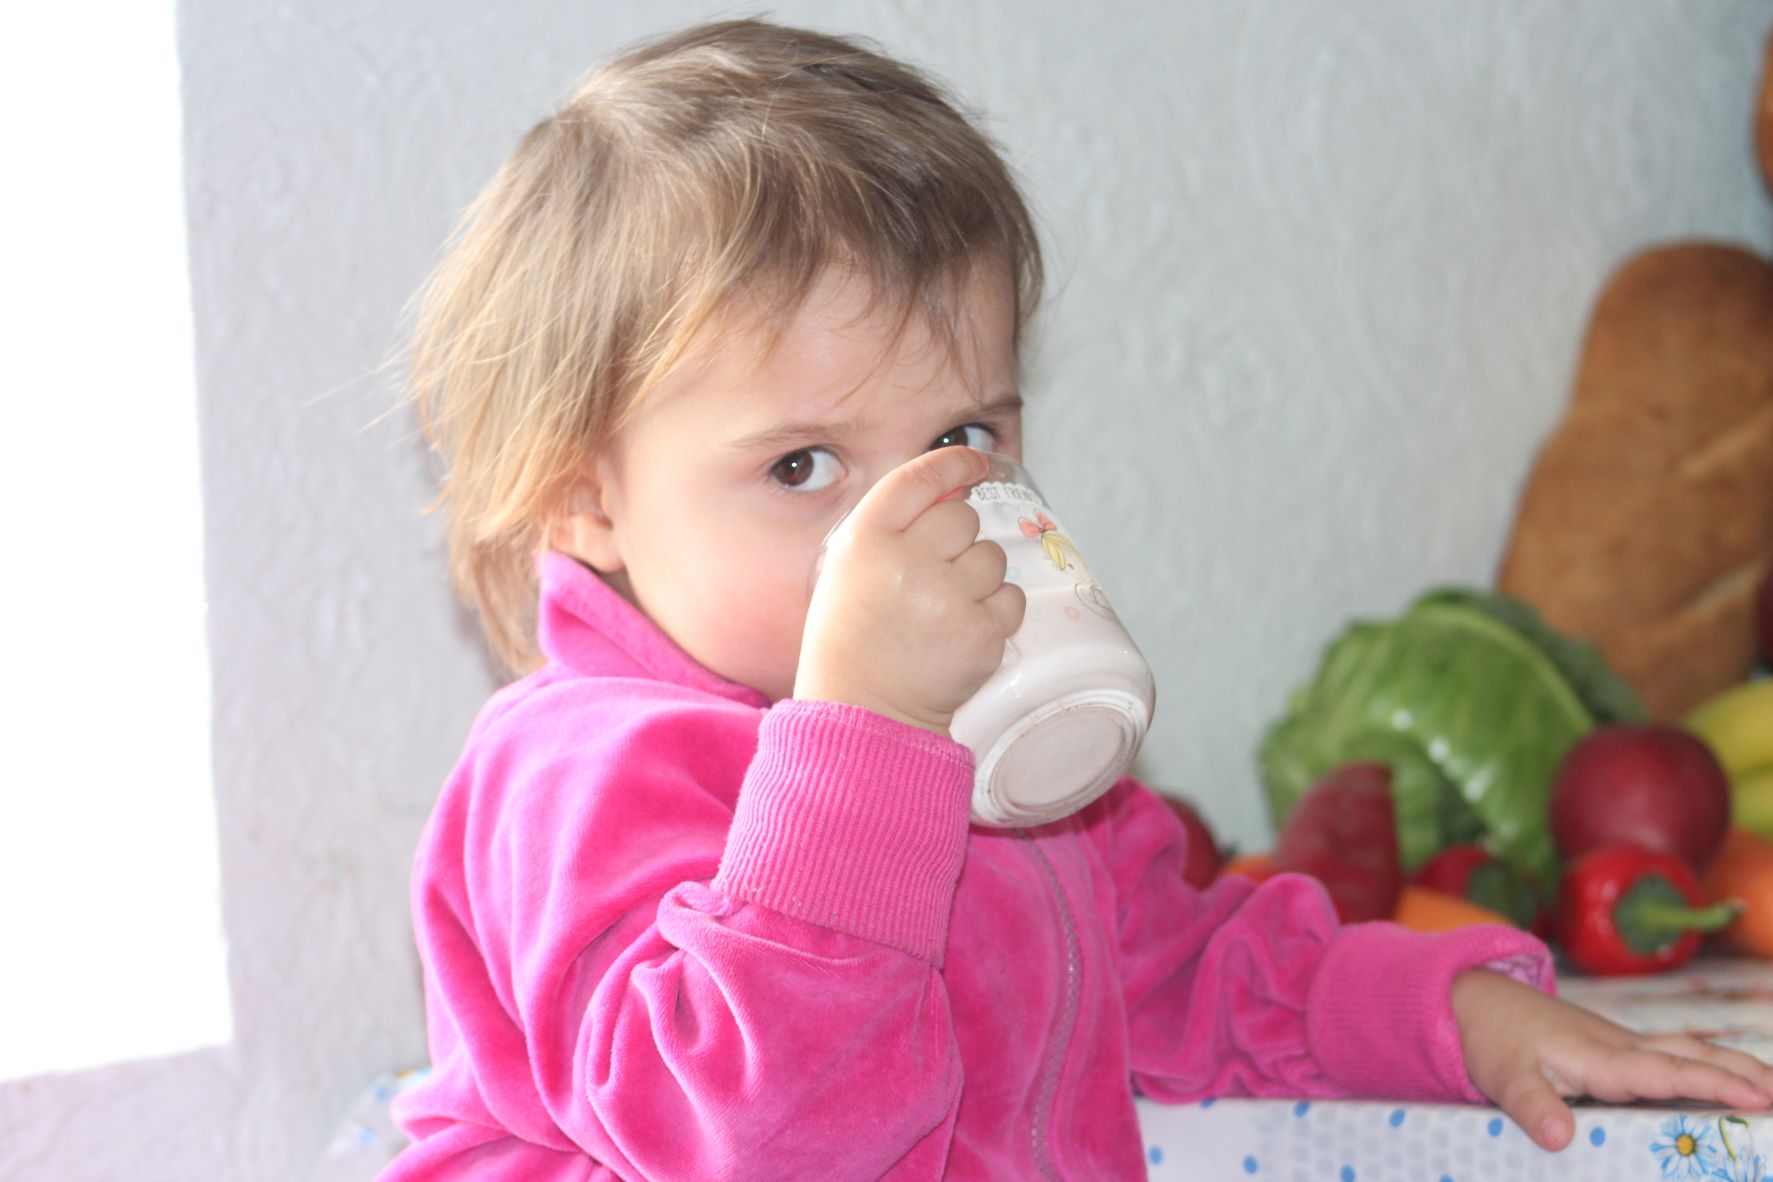 Moldovan child drinking from a cup